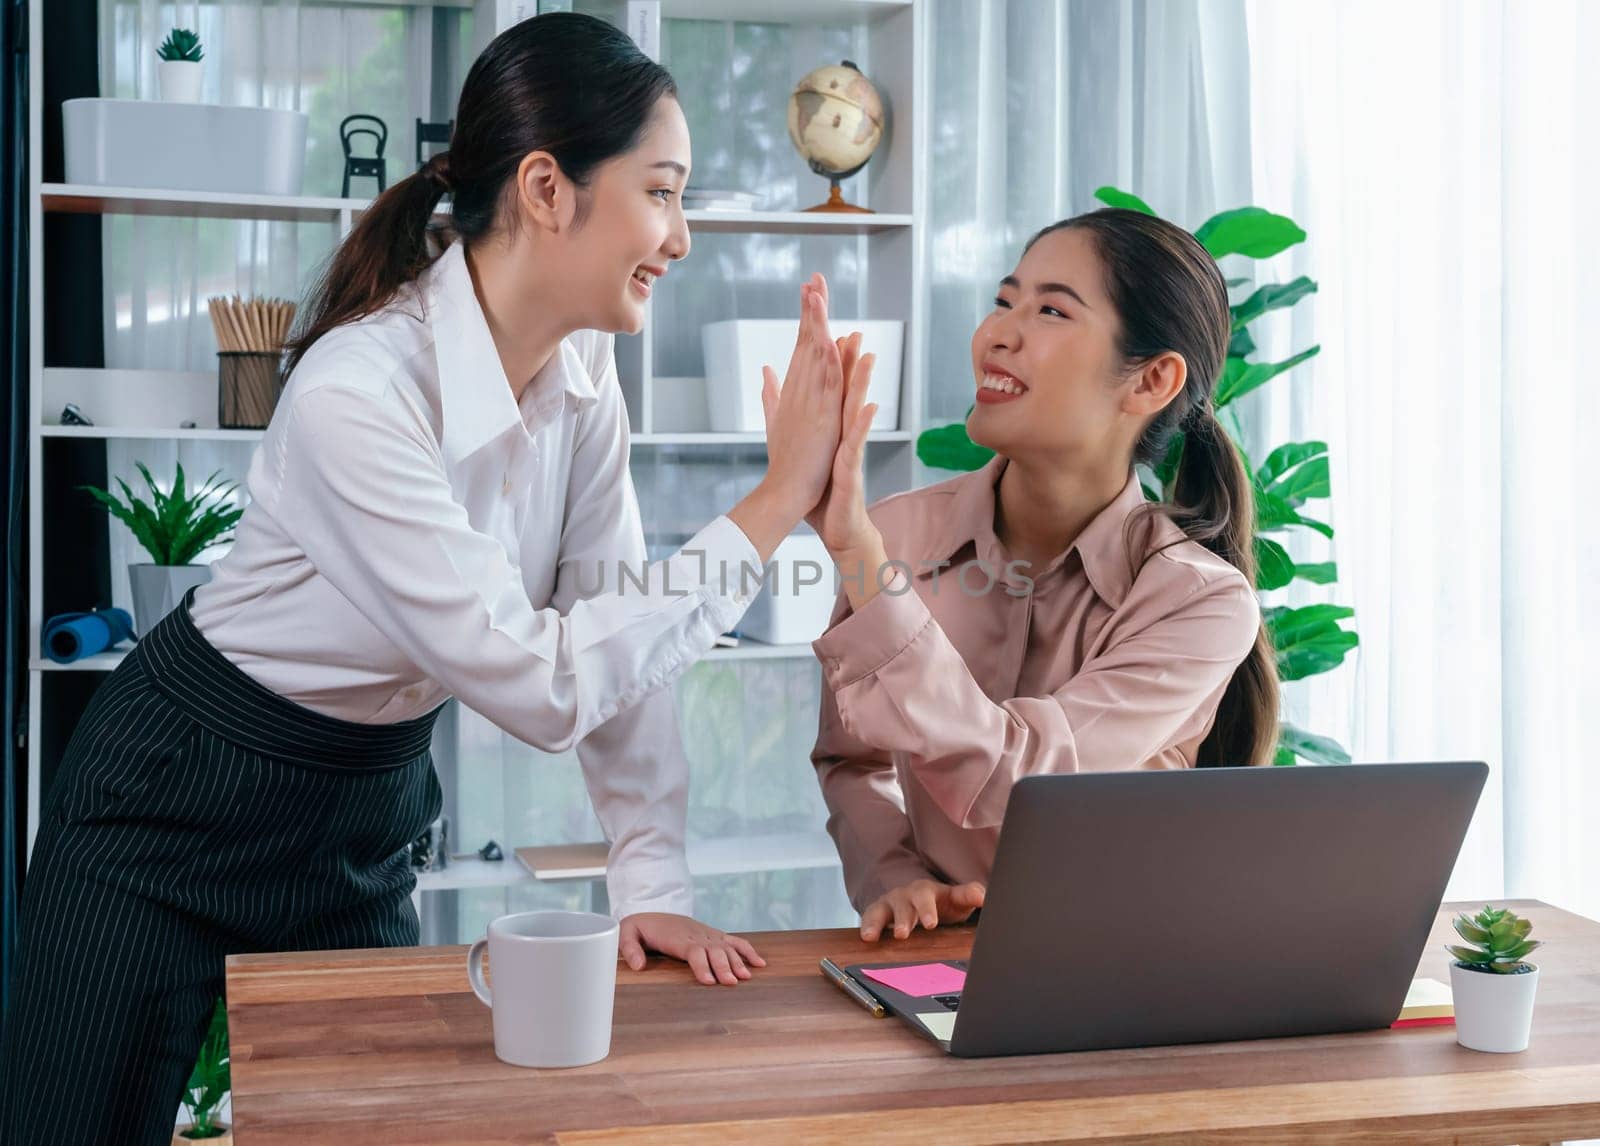 Colleagues in the office workspace give high-five to celebrate completing a project or finding a solution to a problem, showcasing a strong sense of teamwork and friendship in workplace. Enthusiastic